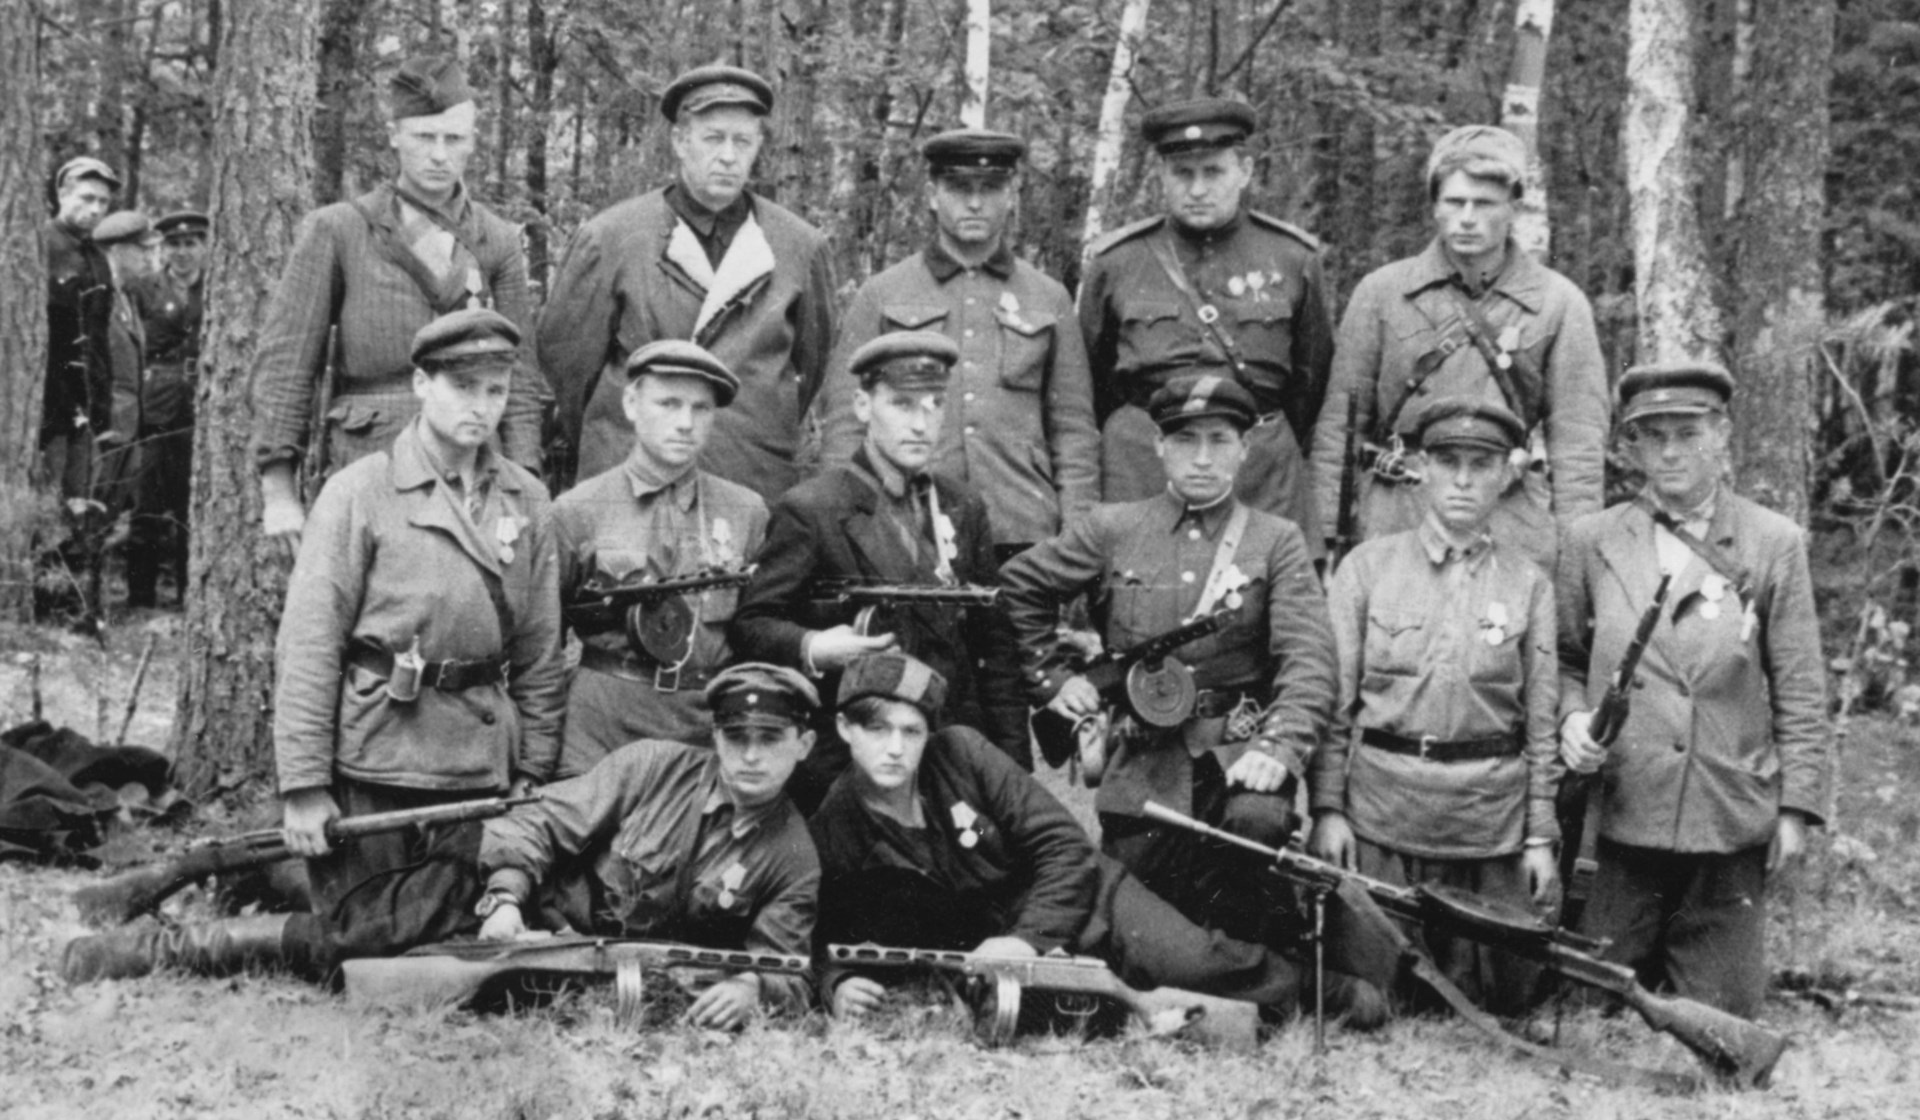 Likely another Red Army-partisan group operating behind the lines, equipped with M1891 rifles, PPSh-41 SMGs and a DP-27 LMG. Author's collection